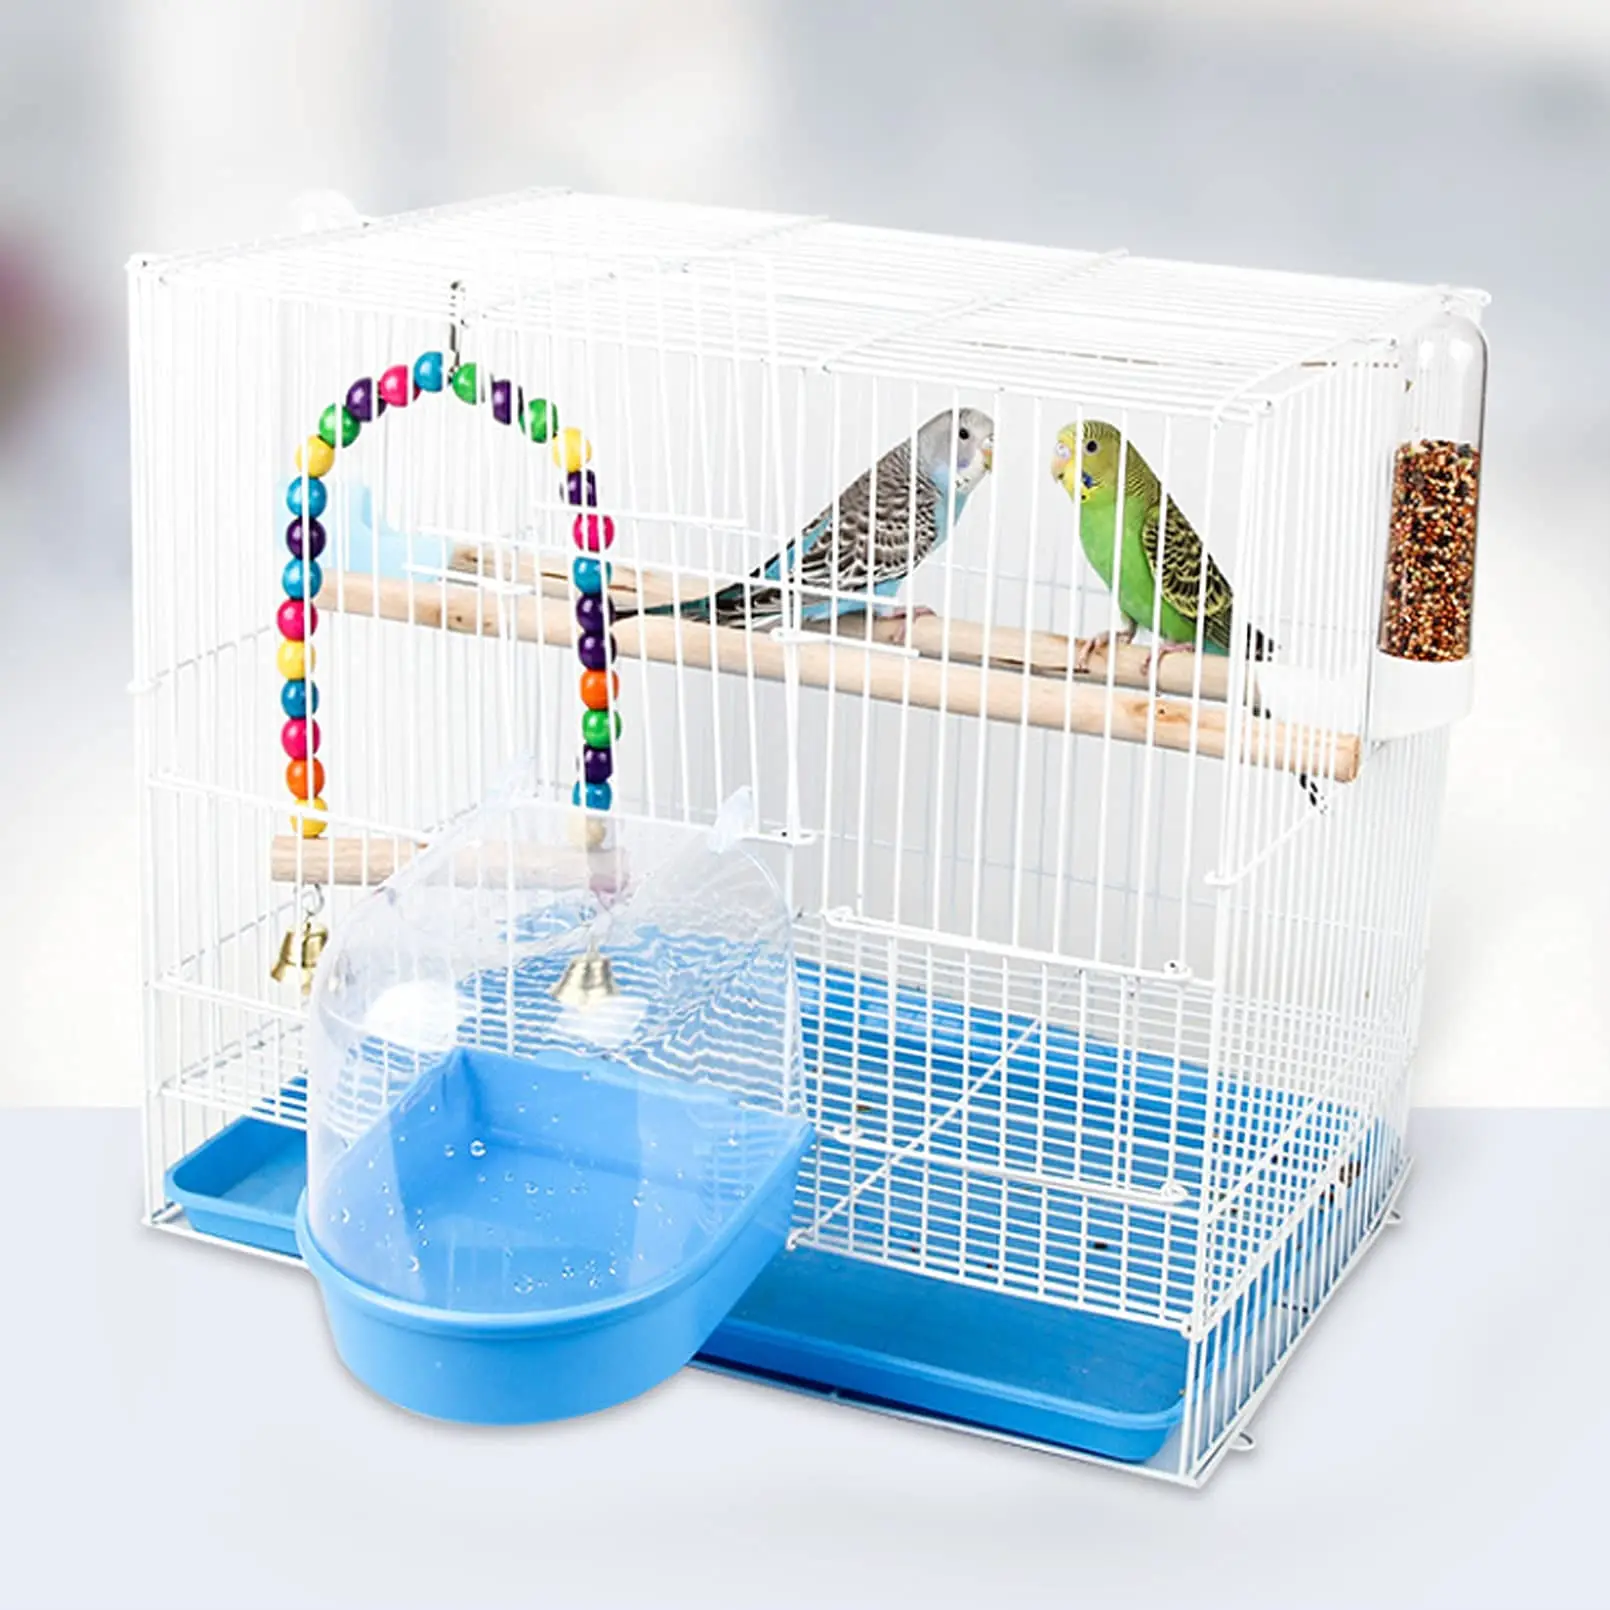 Parrot Bathing Tub Accessory for Pet Brids Finch Canary Parrot Lovebird by Old Tjiko Parakeet Shower Caged Bird Bath Box 